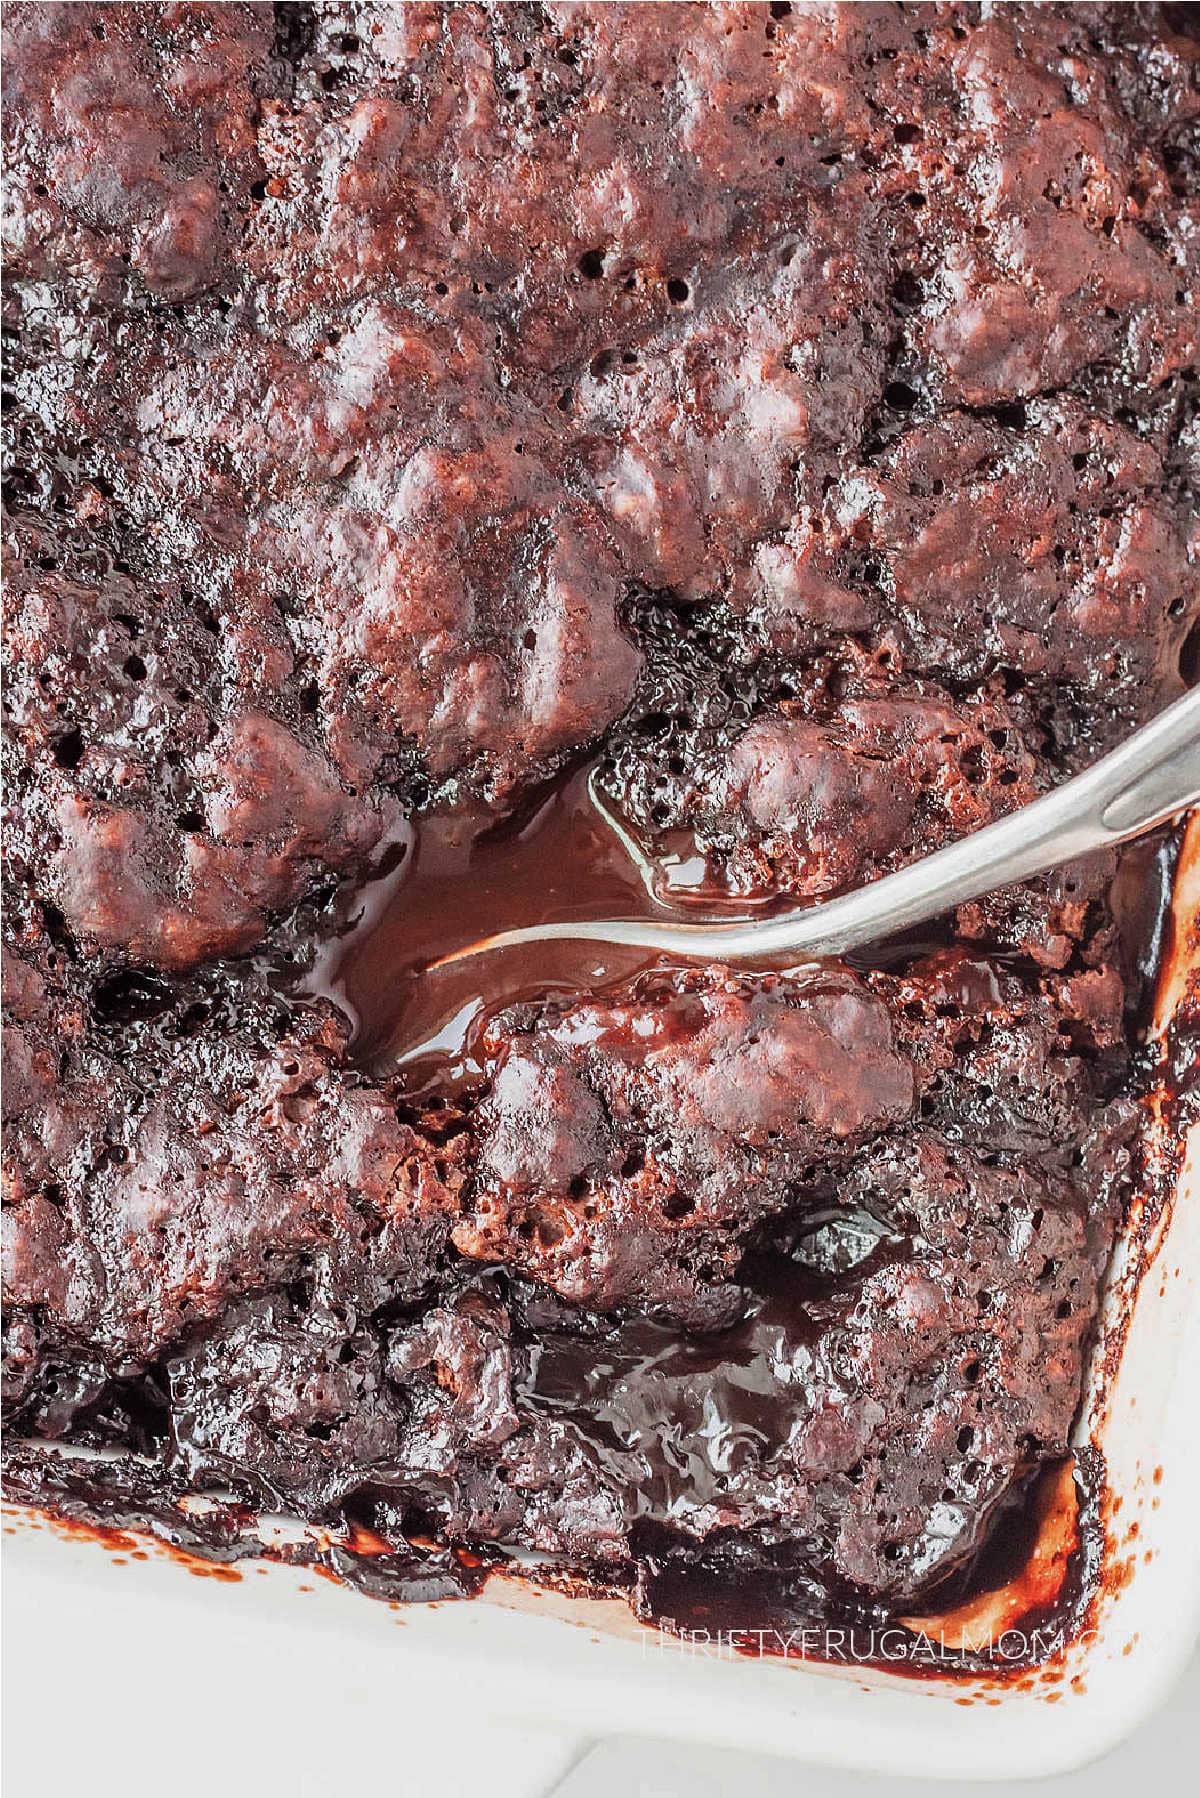 A large spoon stuck in the hot fudge chocolate cobbler.